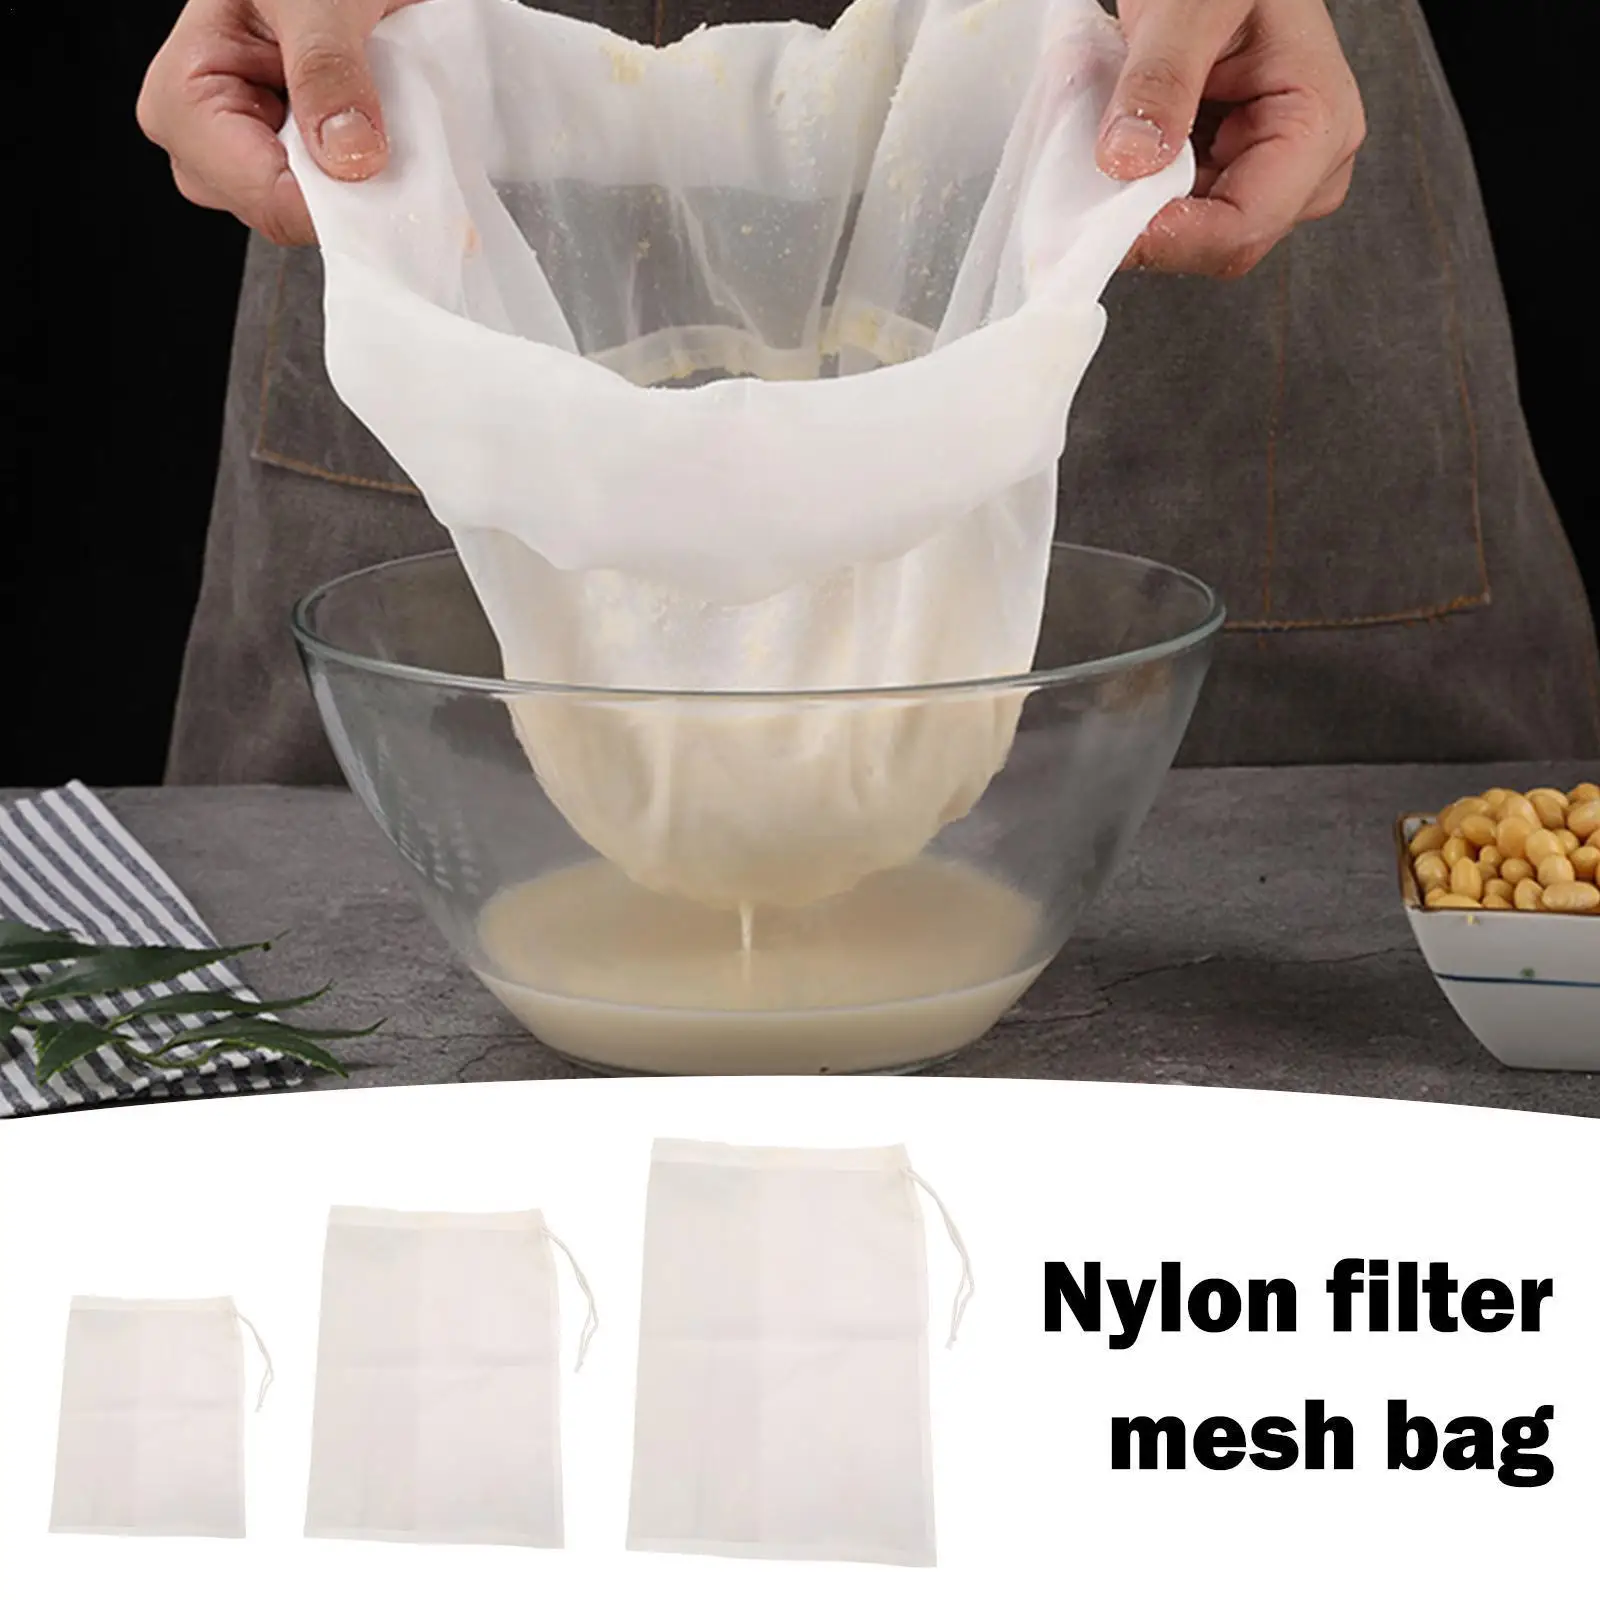 

1pcs Reusable Cheese Cloth Cheesecloth Bags For Straining Nut Milk Bags Cold Brew Bags Tea Yogurt Coffee Filter Strainers B A9v5